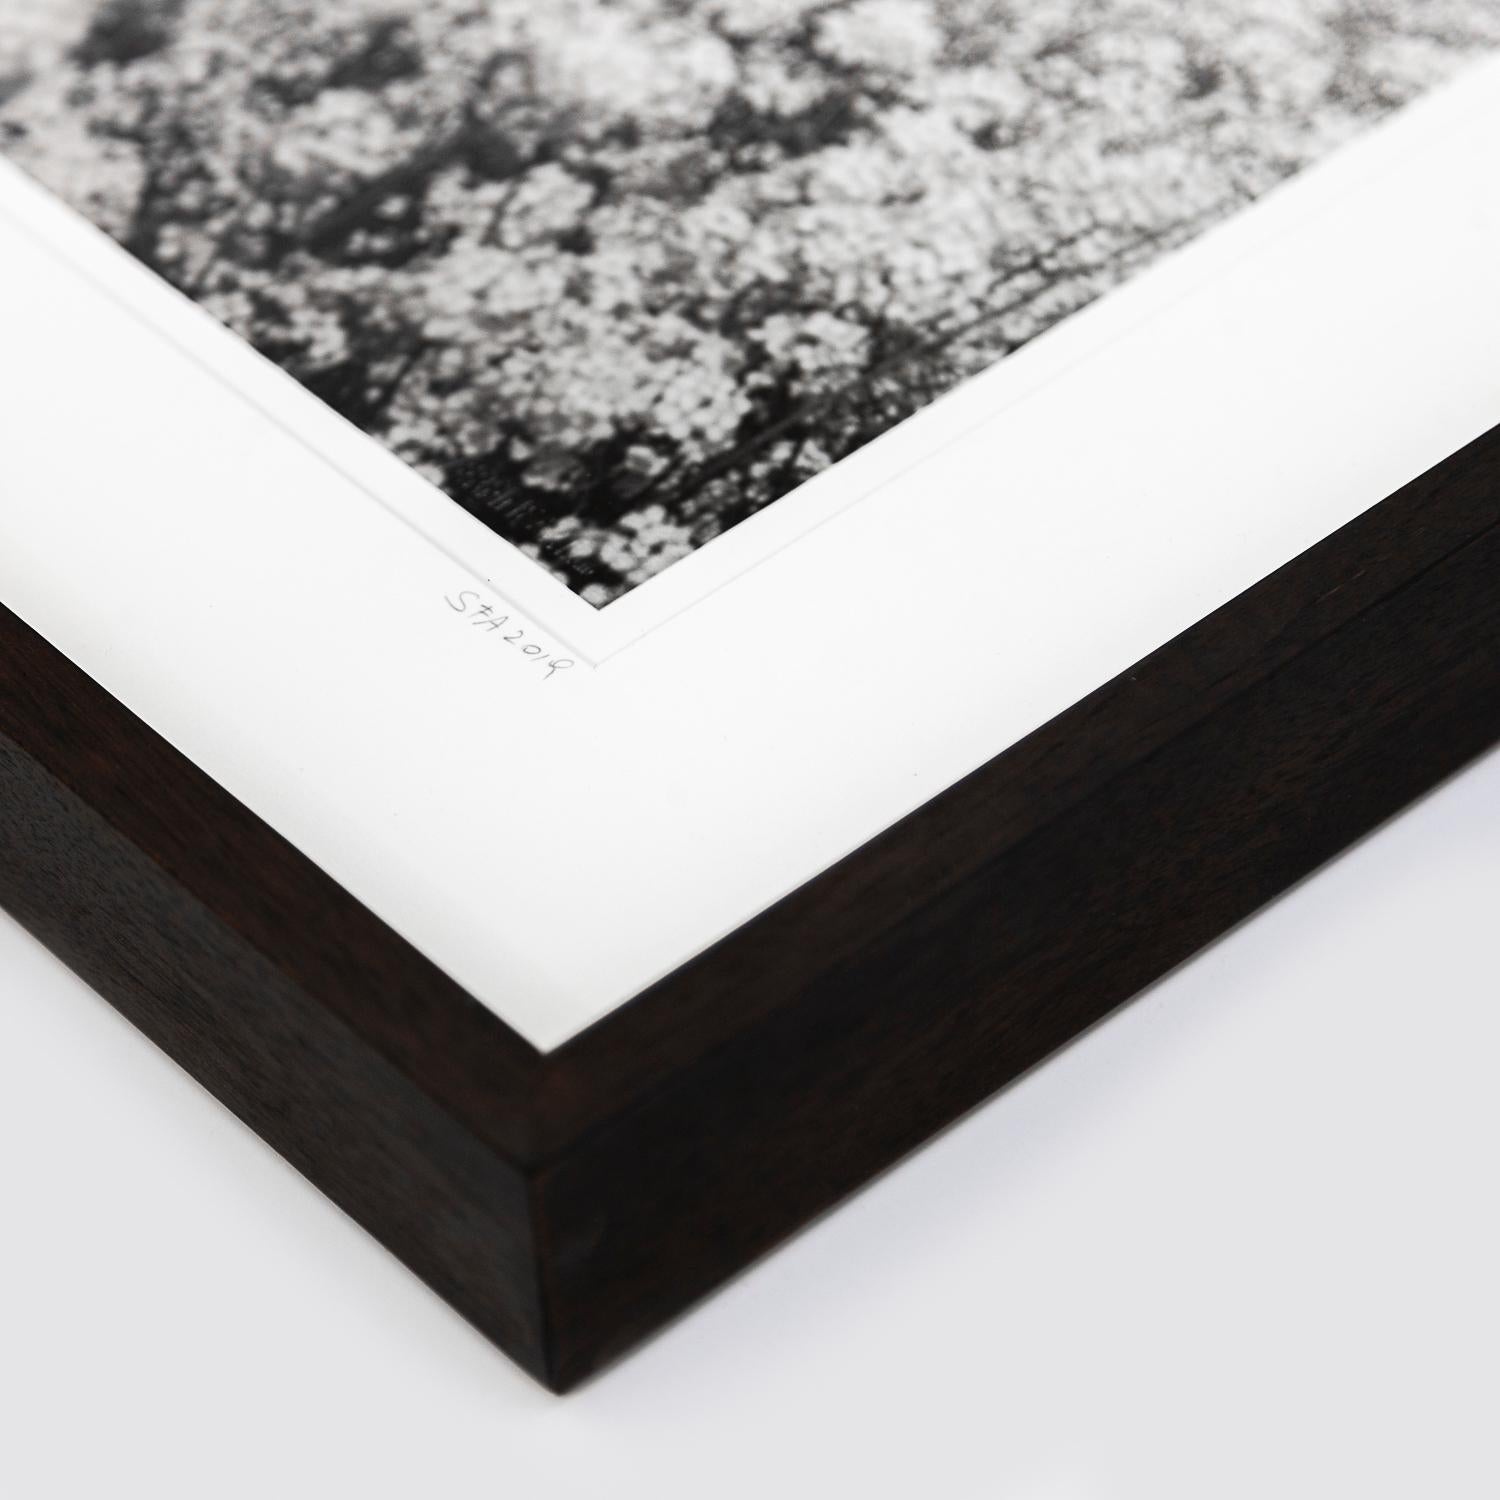 Gerald Berghammer - Limited Edition 1/9
Silver Gelatin Prints, Selenium Toned, Printed 2019
Signed, numbered, dated by Artis.
Handmade wood frame, dark-brown, natural white archival Passepartout, anti-reflection white glass, UV-protection 70, metal